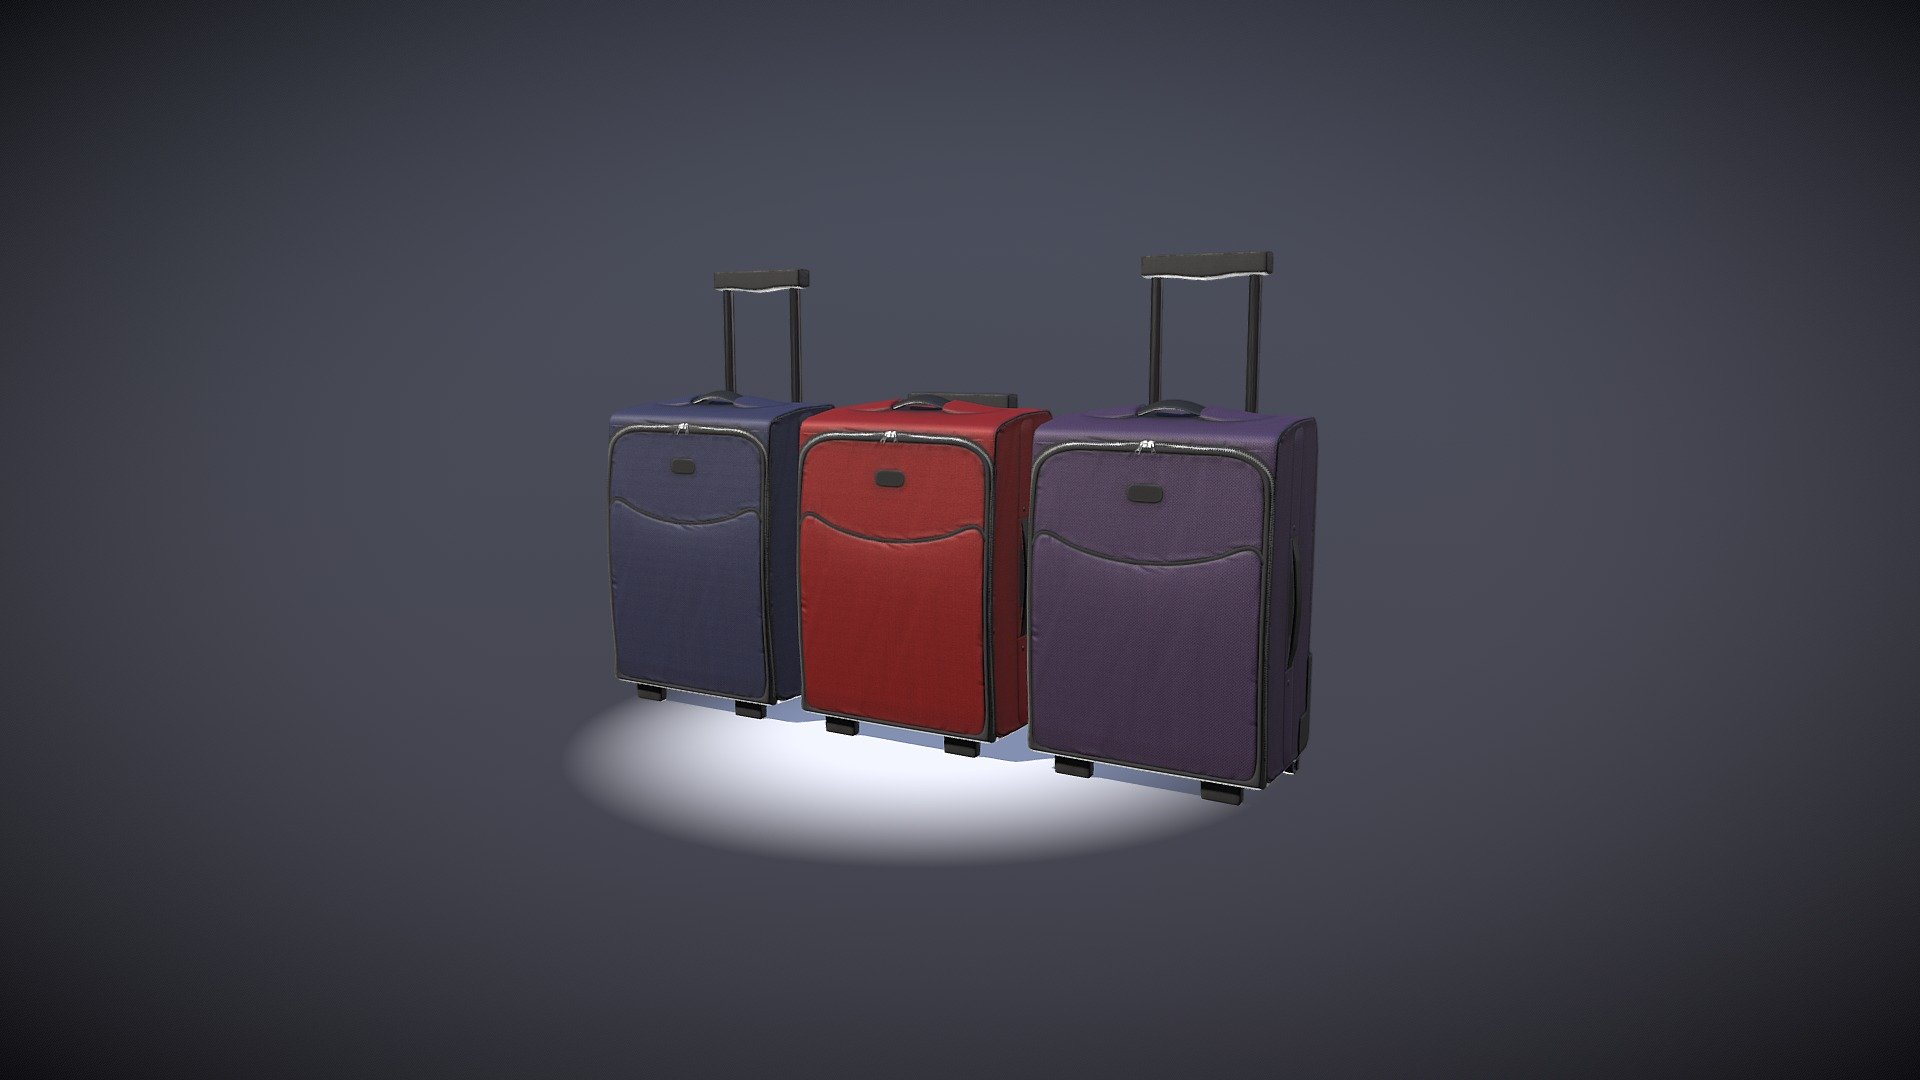 Highly detailed PBR Luggage Case. With 3 Texture Variations, includes model with handle extended or closed.

PBR 4k textures - Albedo - Metalness/Roughness/Glossiness - Normal - AO - RMA - RGB Material Masks

Additional file contains .fbx of each asset centered and all textures - Luggage 01 - Buy Royalty Free 3D model by rvh 3d model